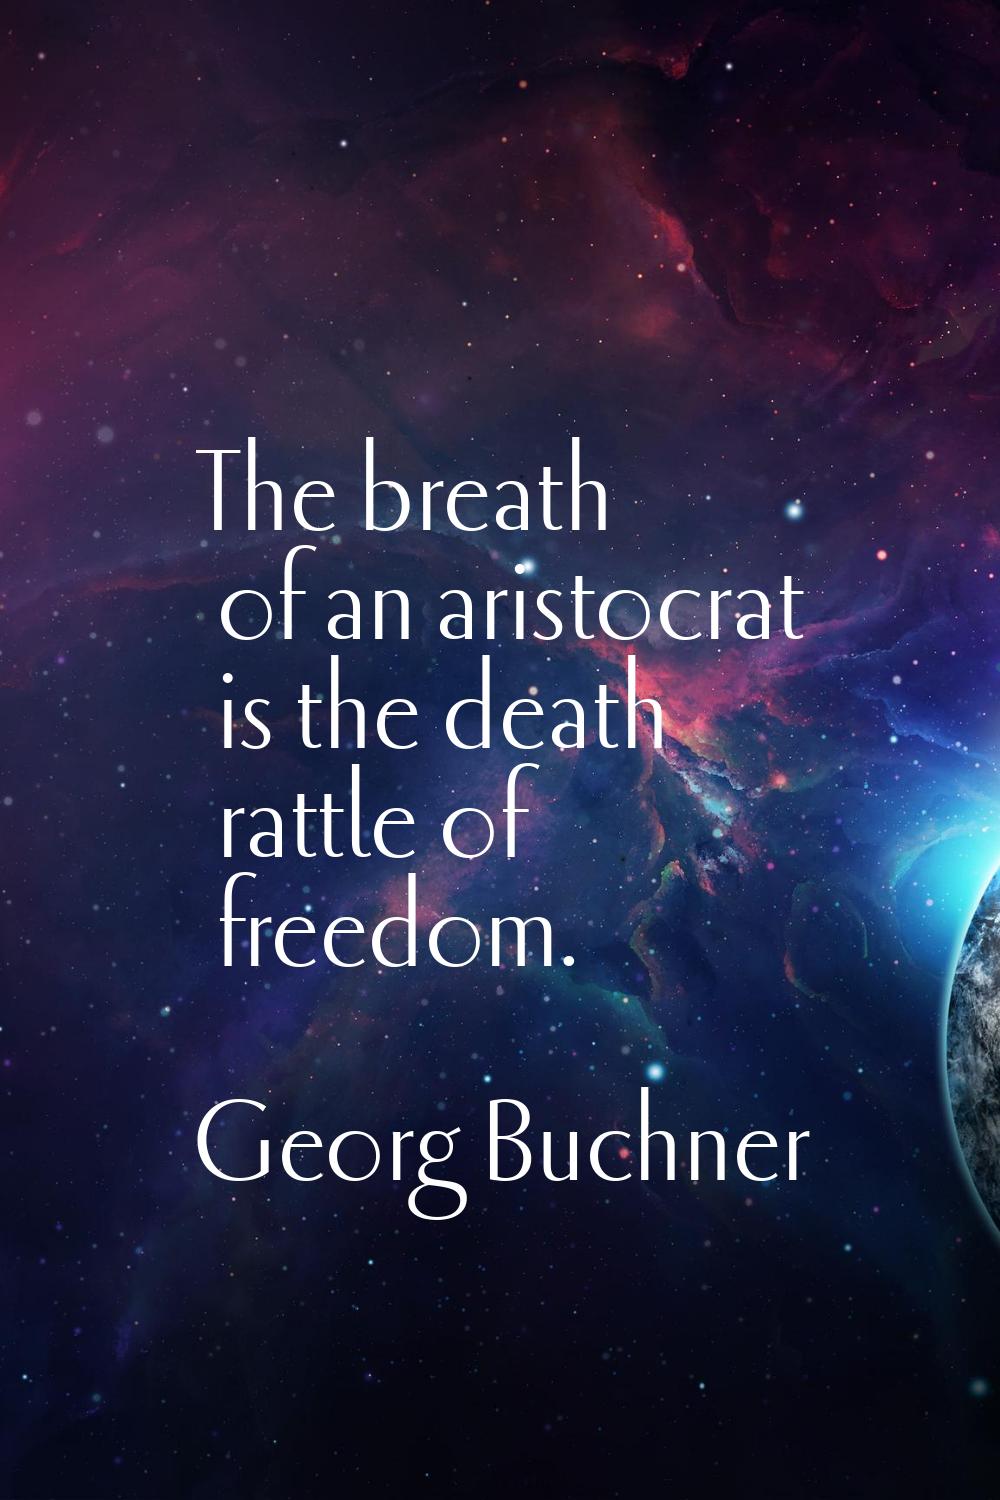 The breath of an aristocrat is the death rattle of freedom.